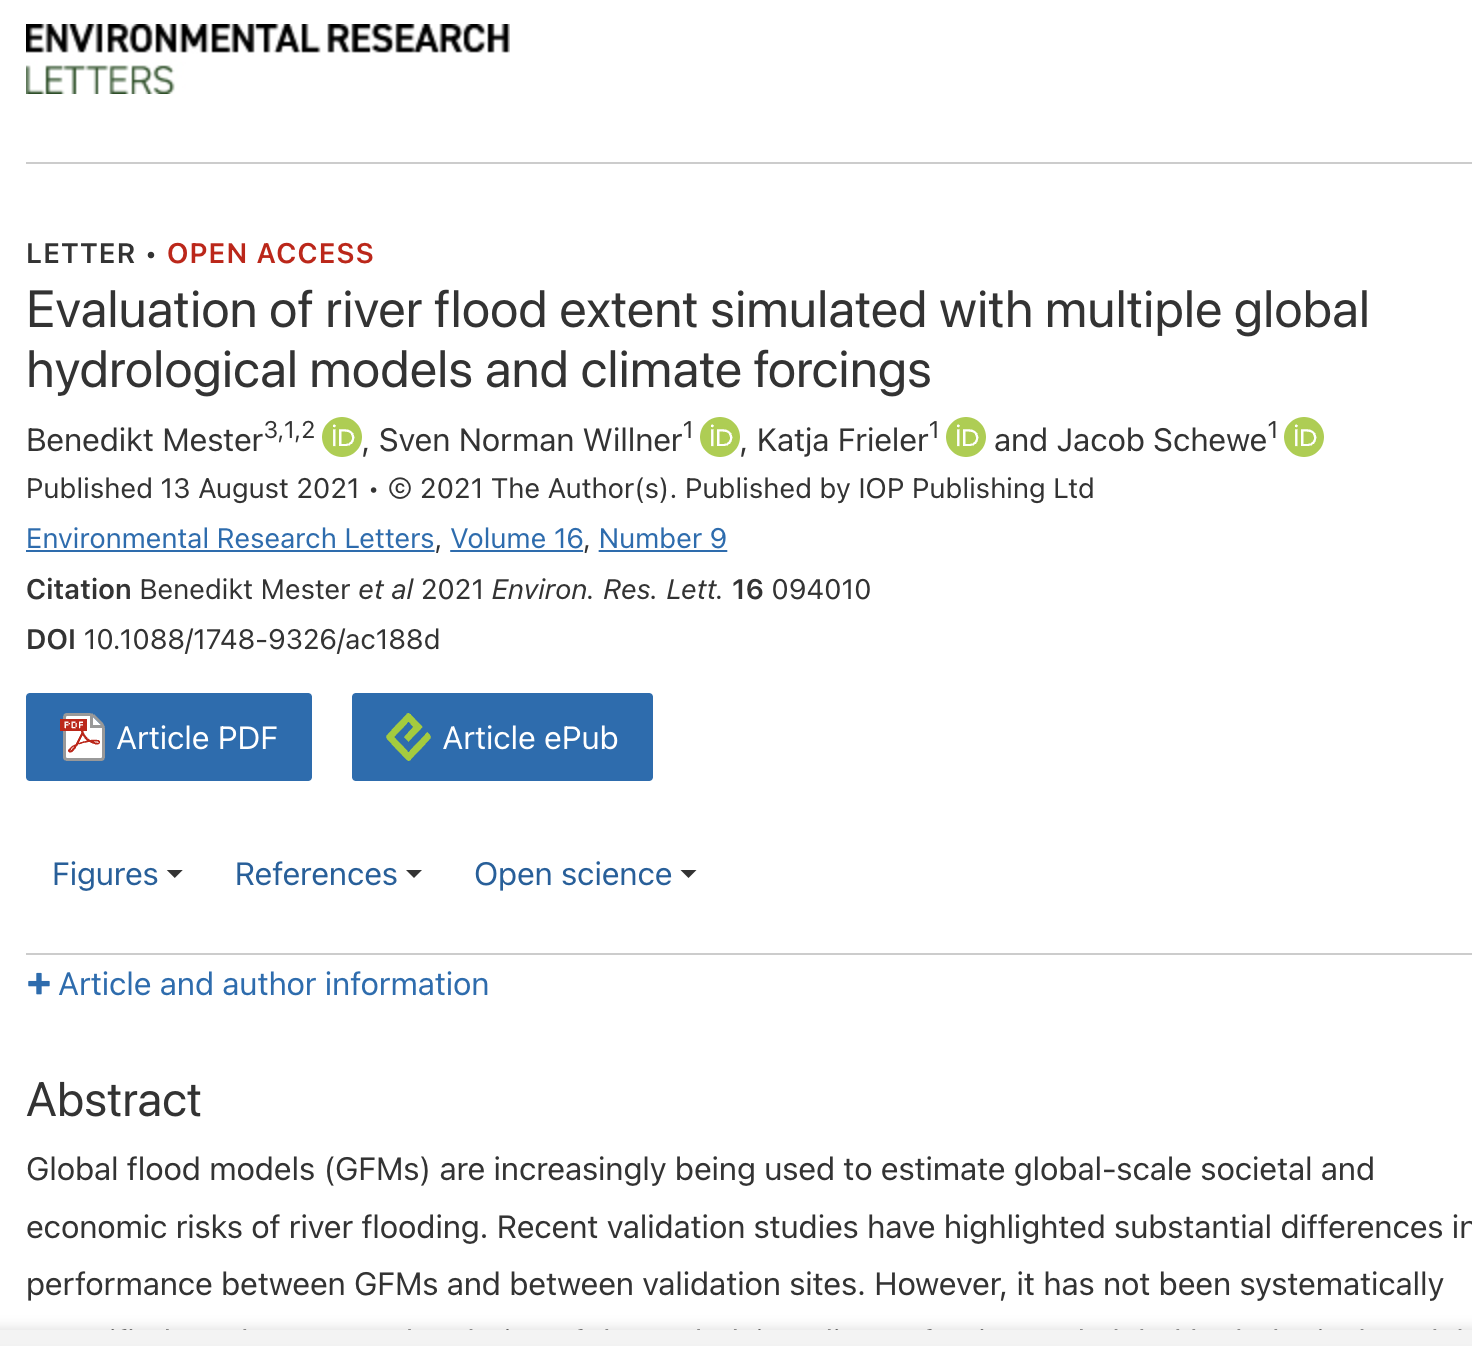 WP5 International cooperation, development and resilience- Evaluation of river flood extent simulated with multiple global hydrological models and climate forcings